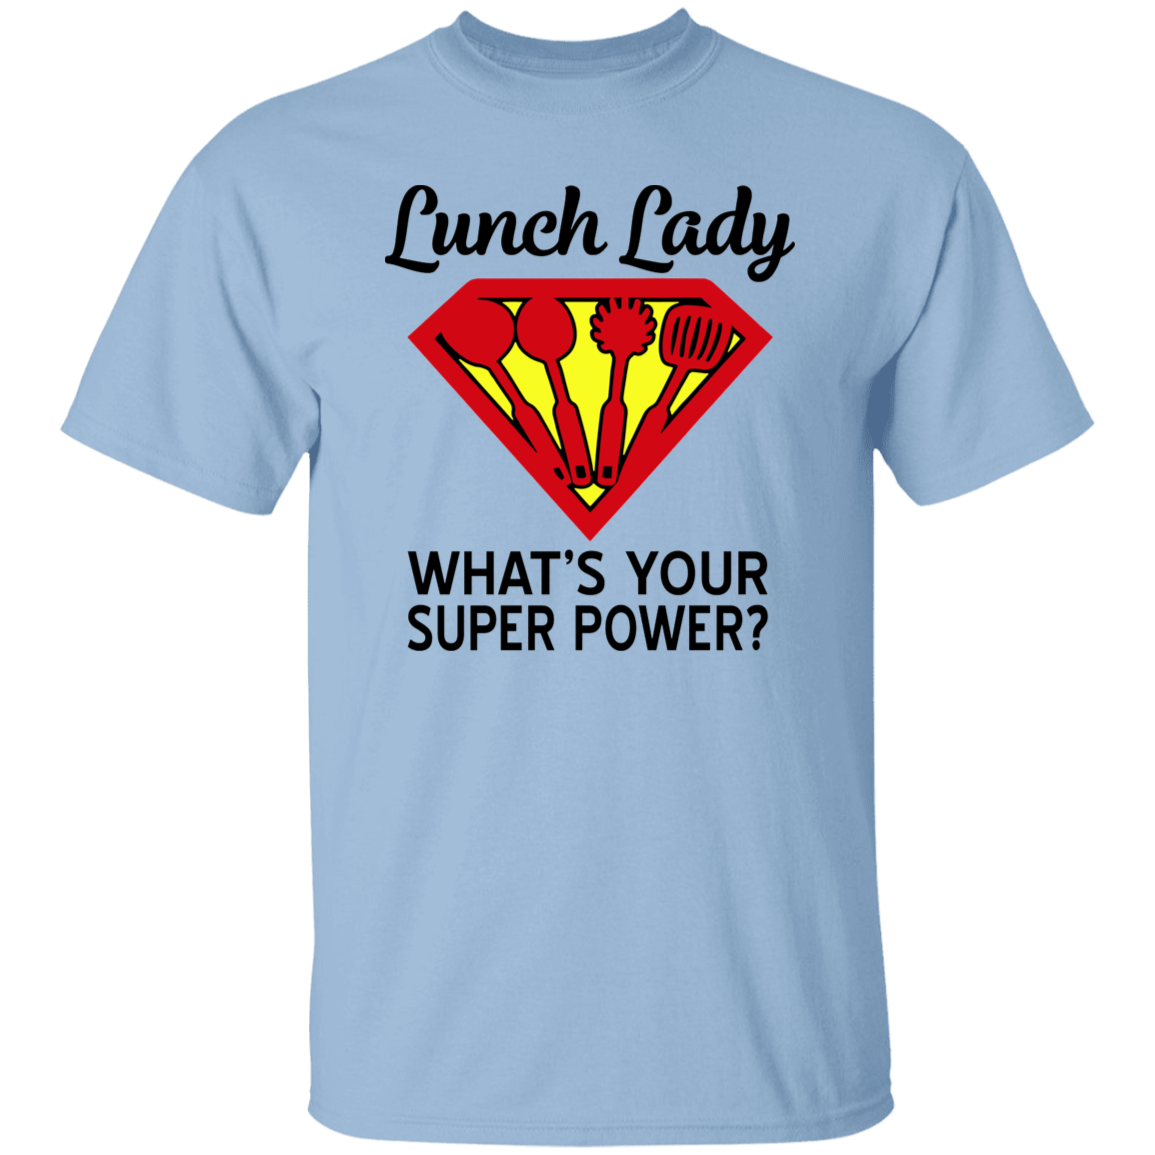 Lunch Lady T-Shirt